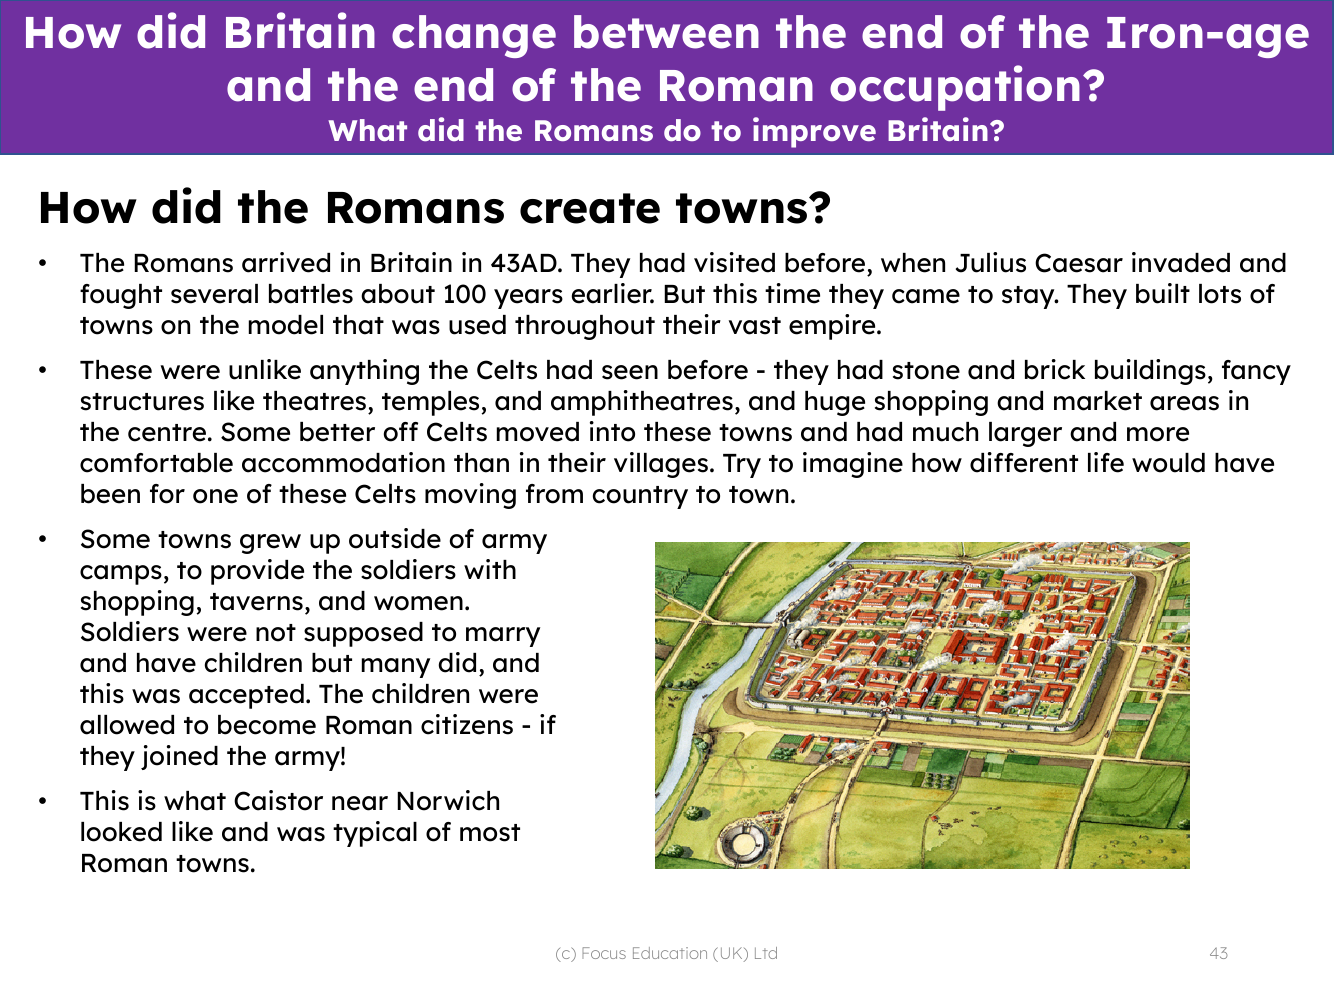 How did the Romans create towns? - Info pack